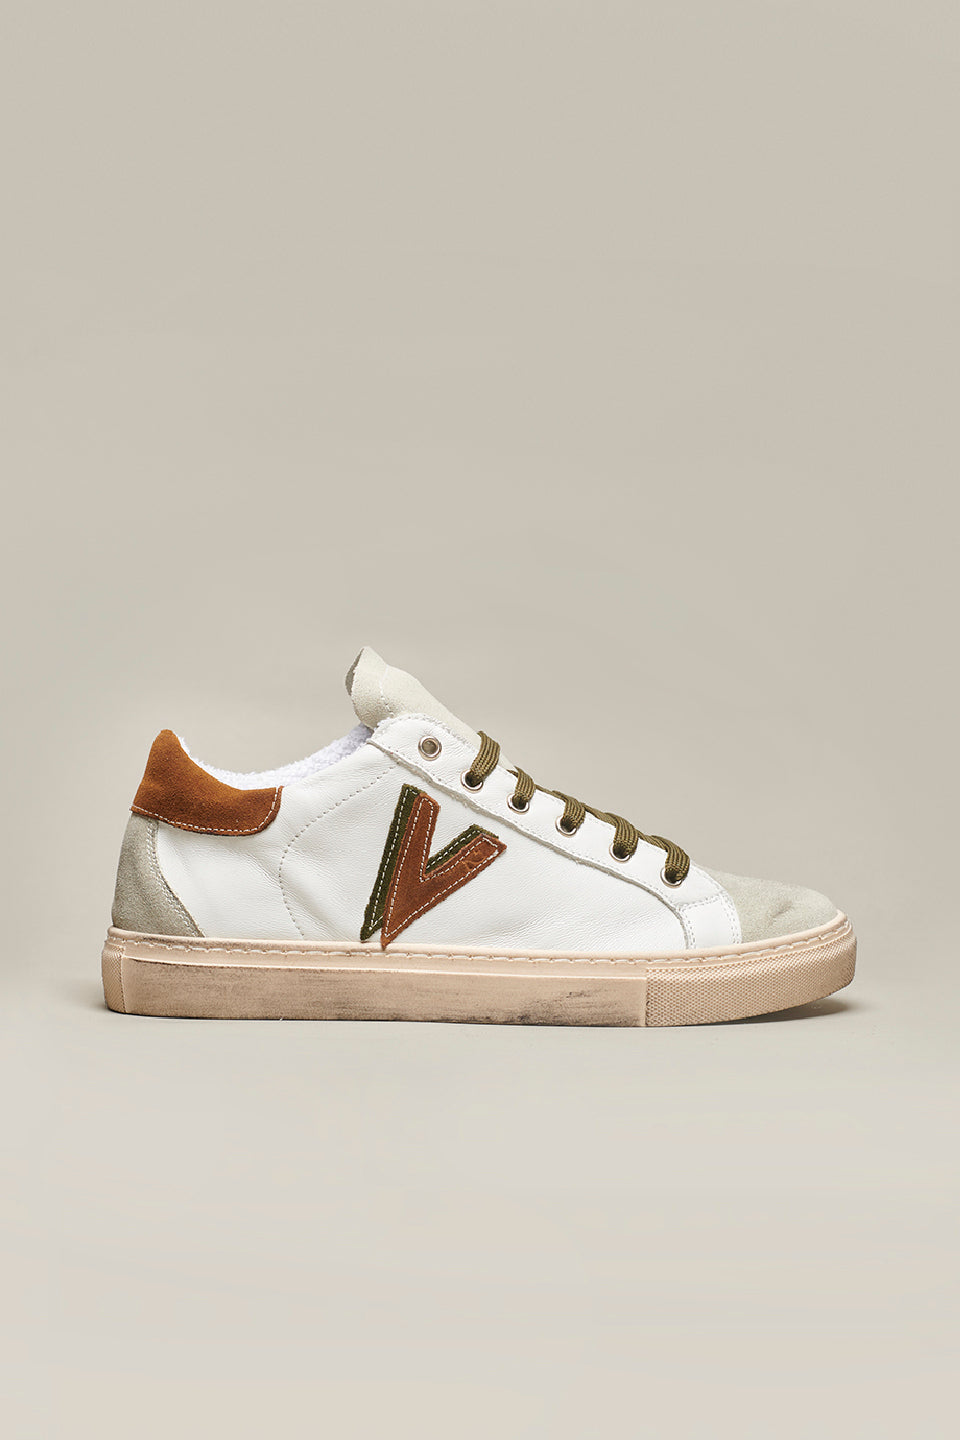 OLYMPIC V - White low sole sneakers with two-tone Camel and Military Green back and insert